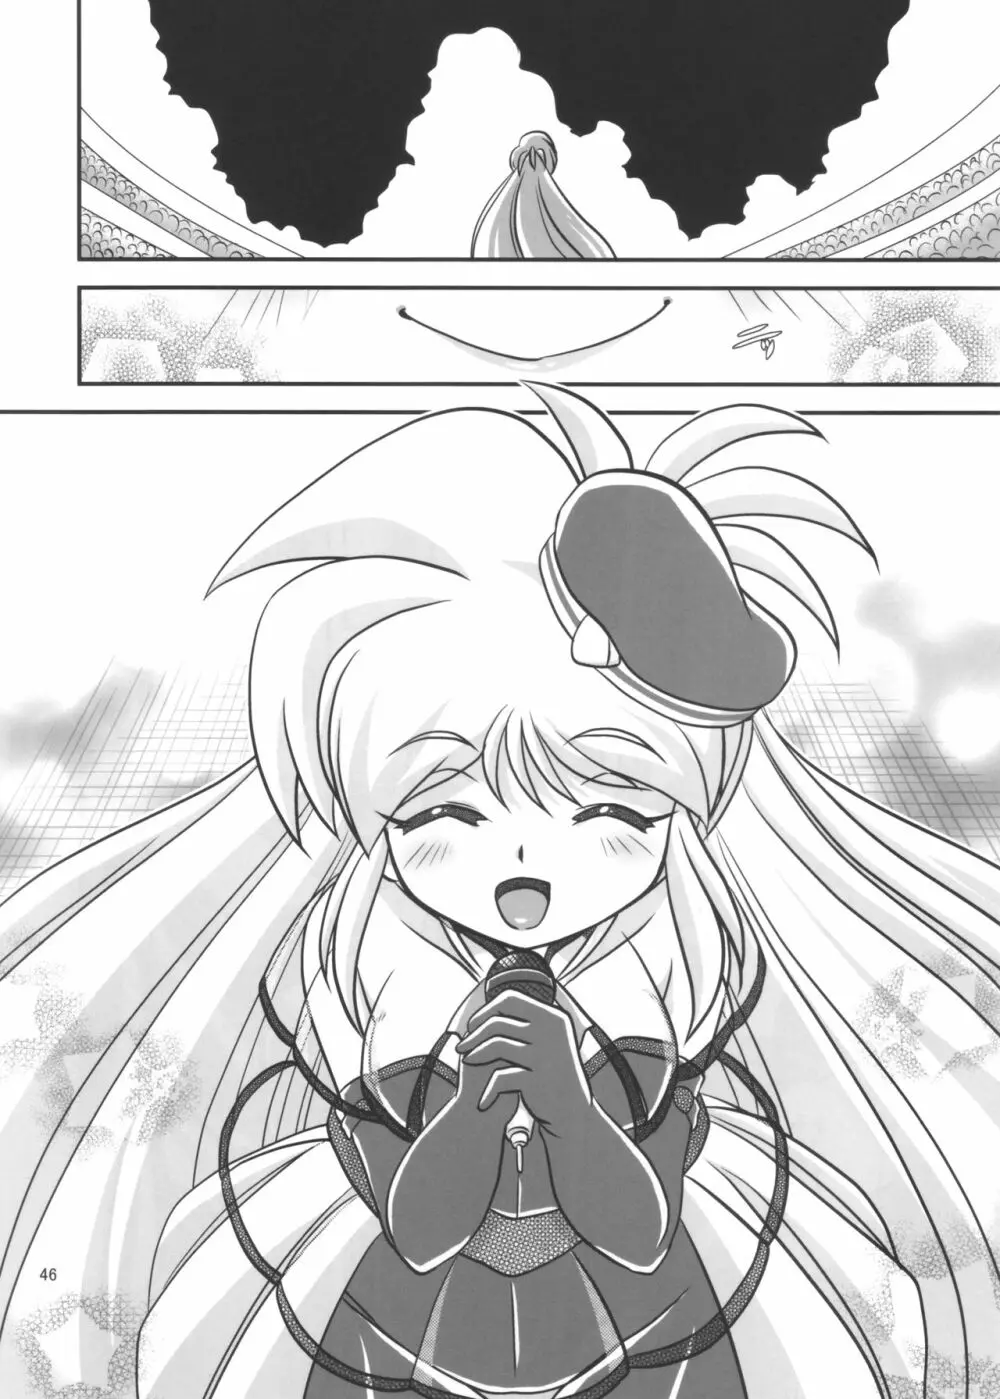 Lightning lovers 9 - page46